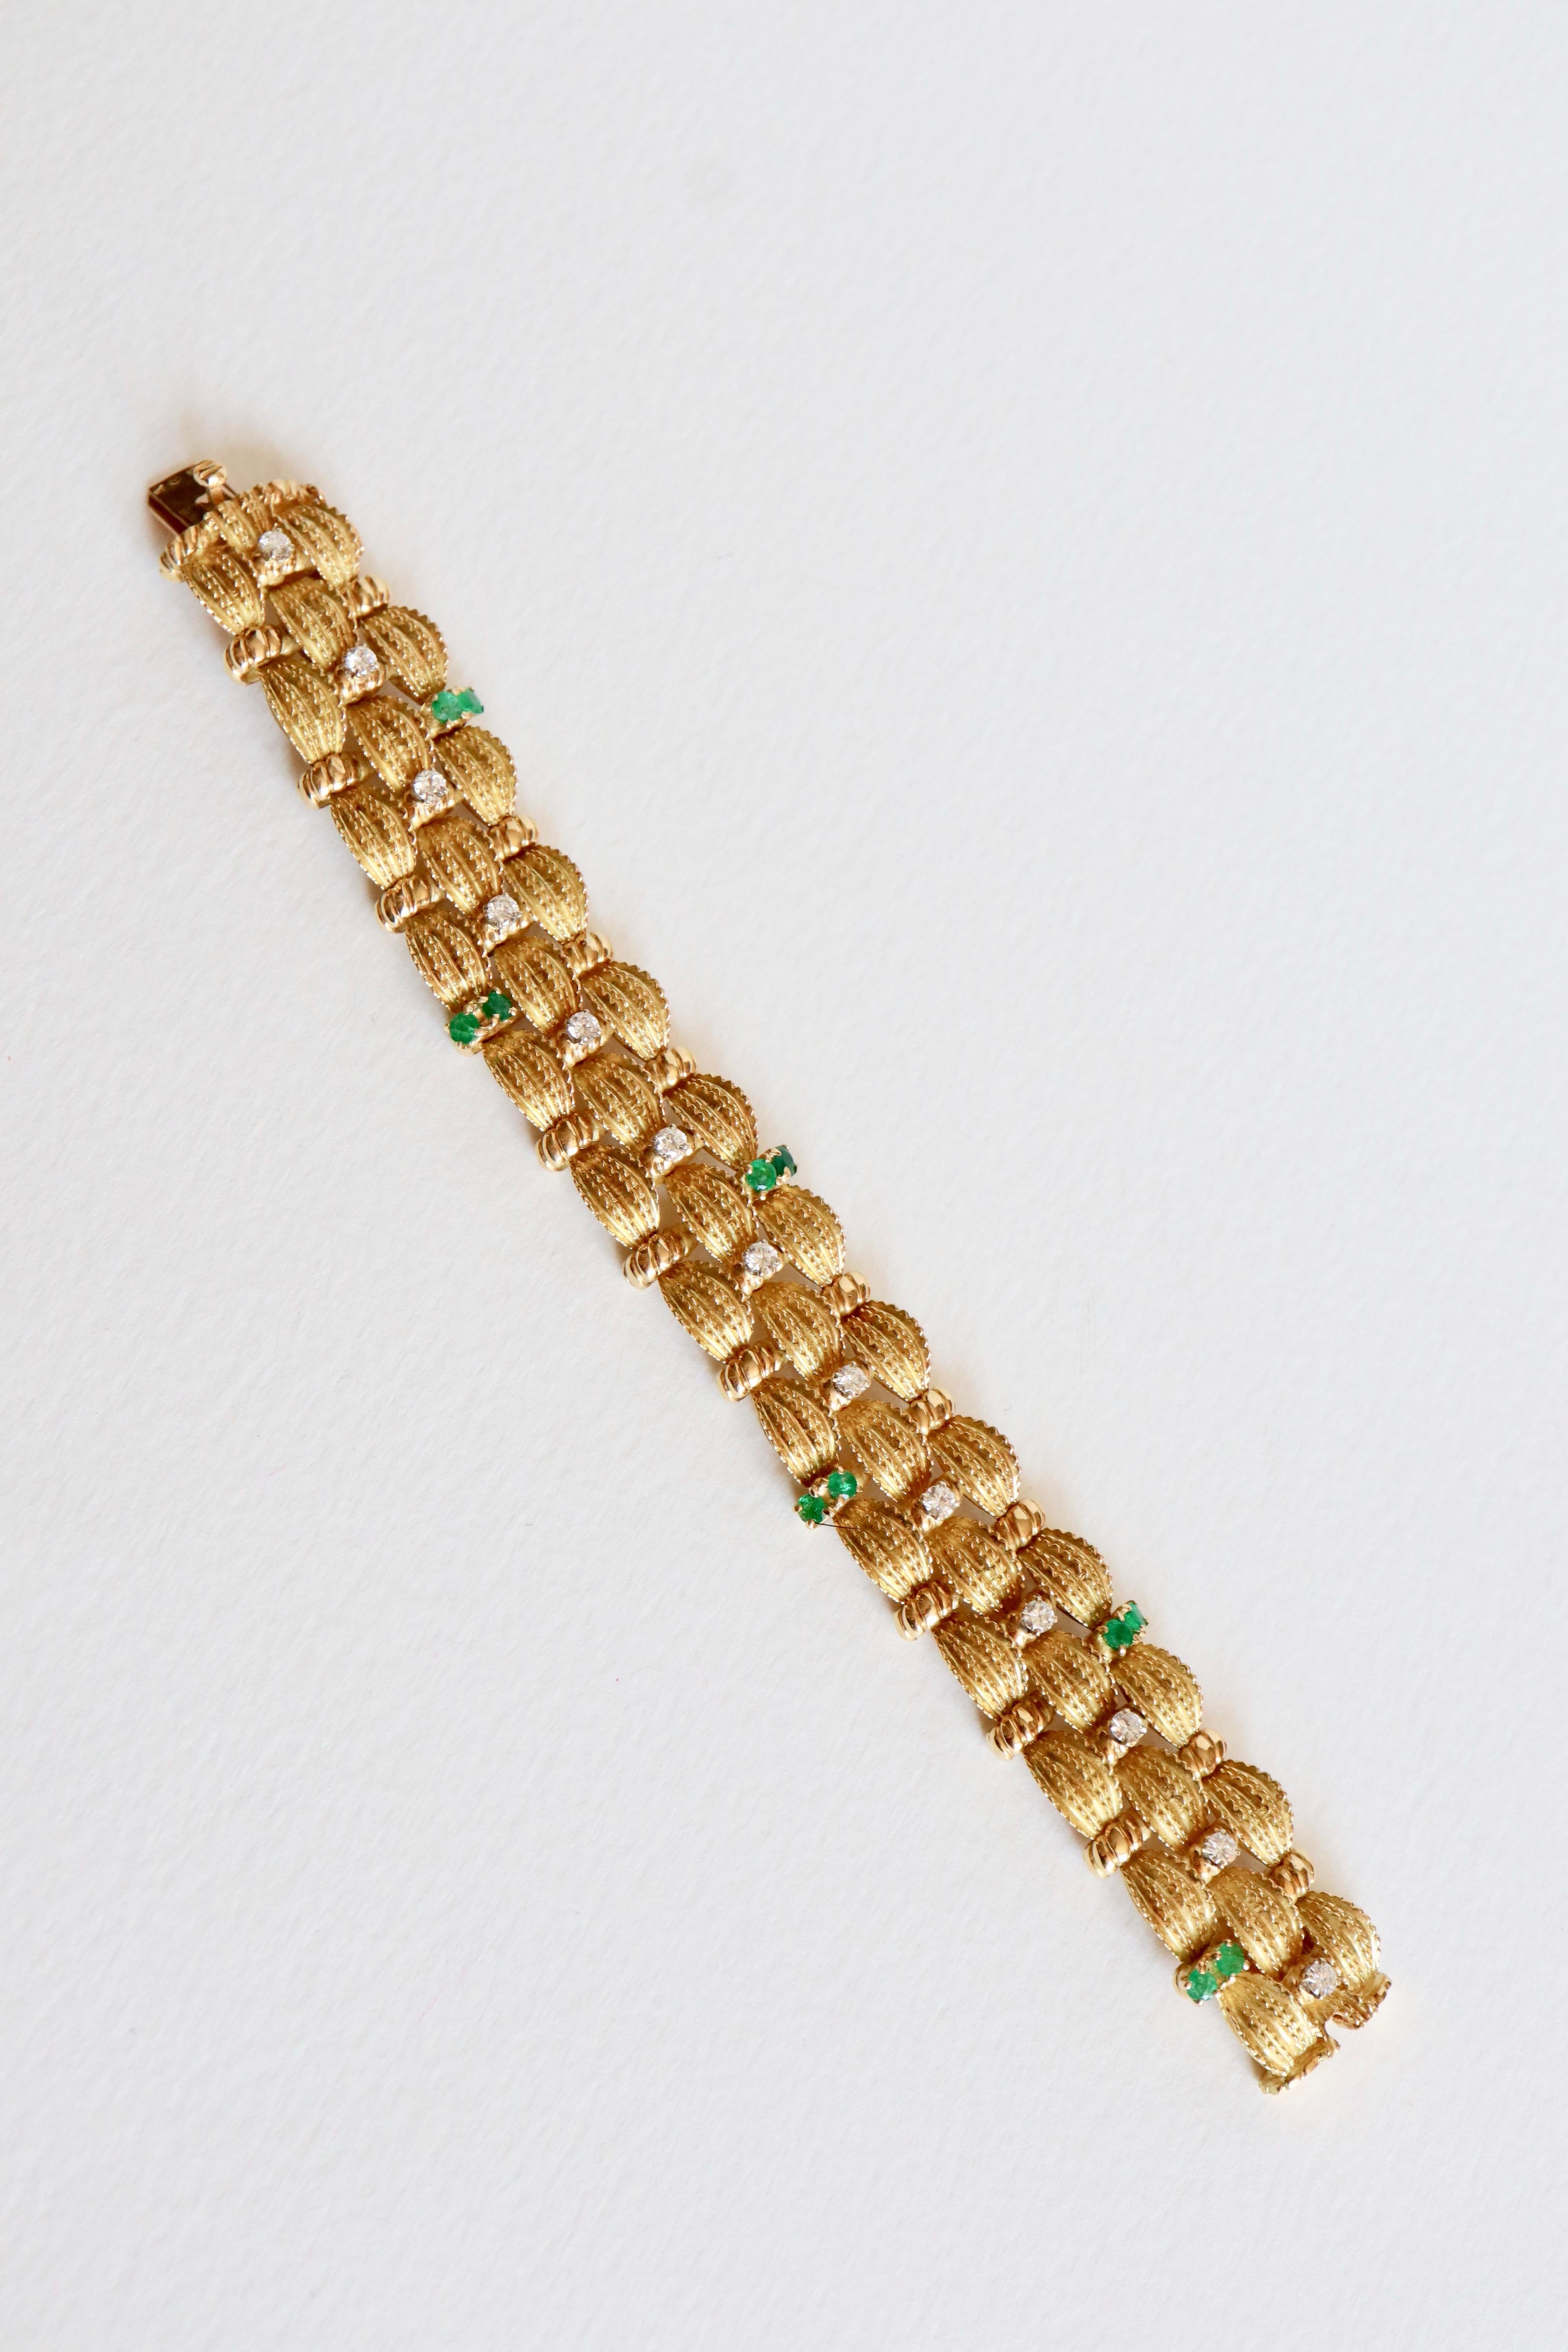 Bracelet circa 1960 articulated in 18K yellow Gold, pattern of braids set with 13 Diamonds on the central part and 3 pairs of Emeralds, that is 12 emeralds, on the side parts. 
Eight security. 
Length 16.8 cm Width 2 cm Gross weight: 61 g
Eagle Head